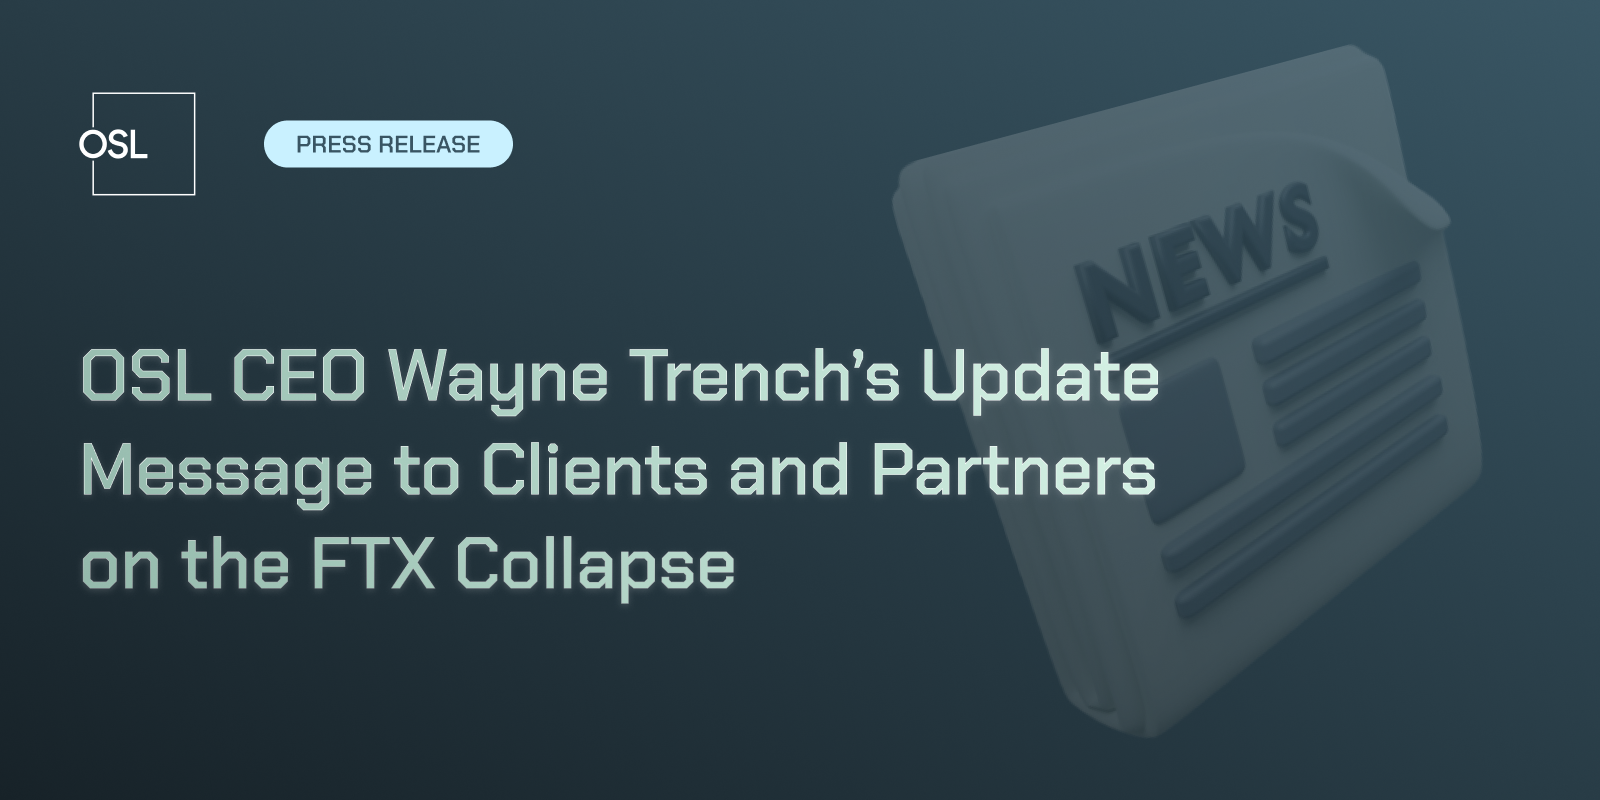 OSL CEO Wayne Trench’s Update Message to Clients and Partners on the FTX Collapse